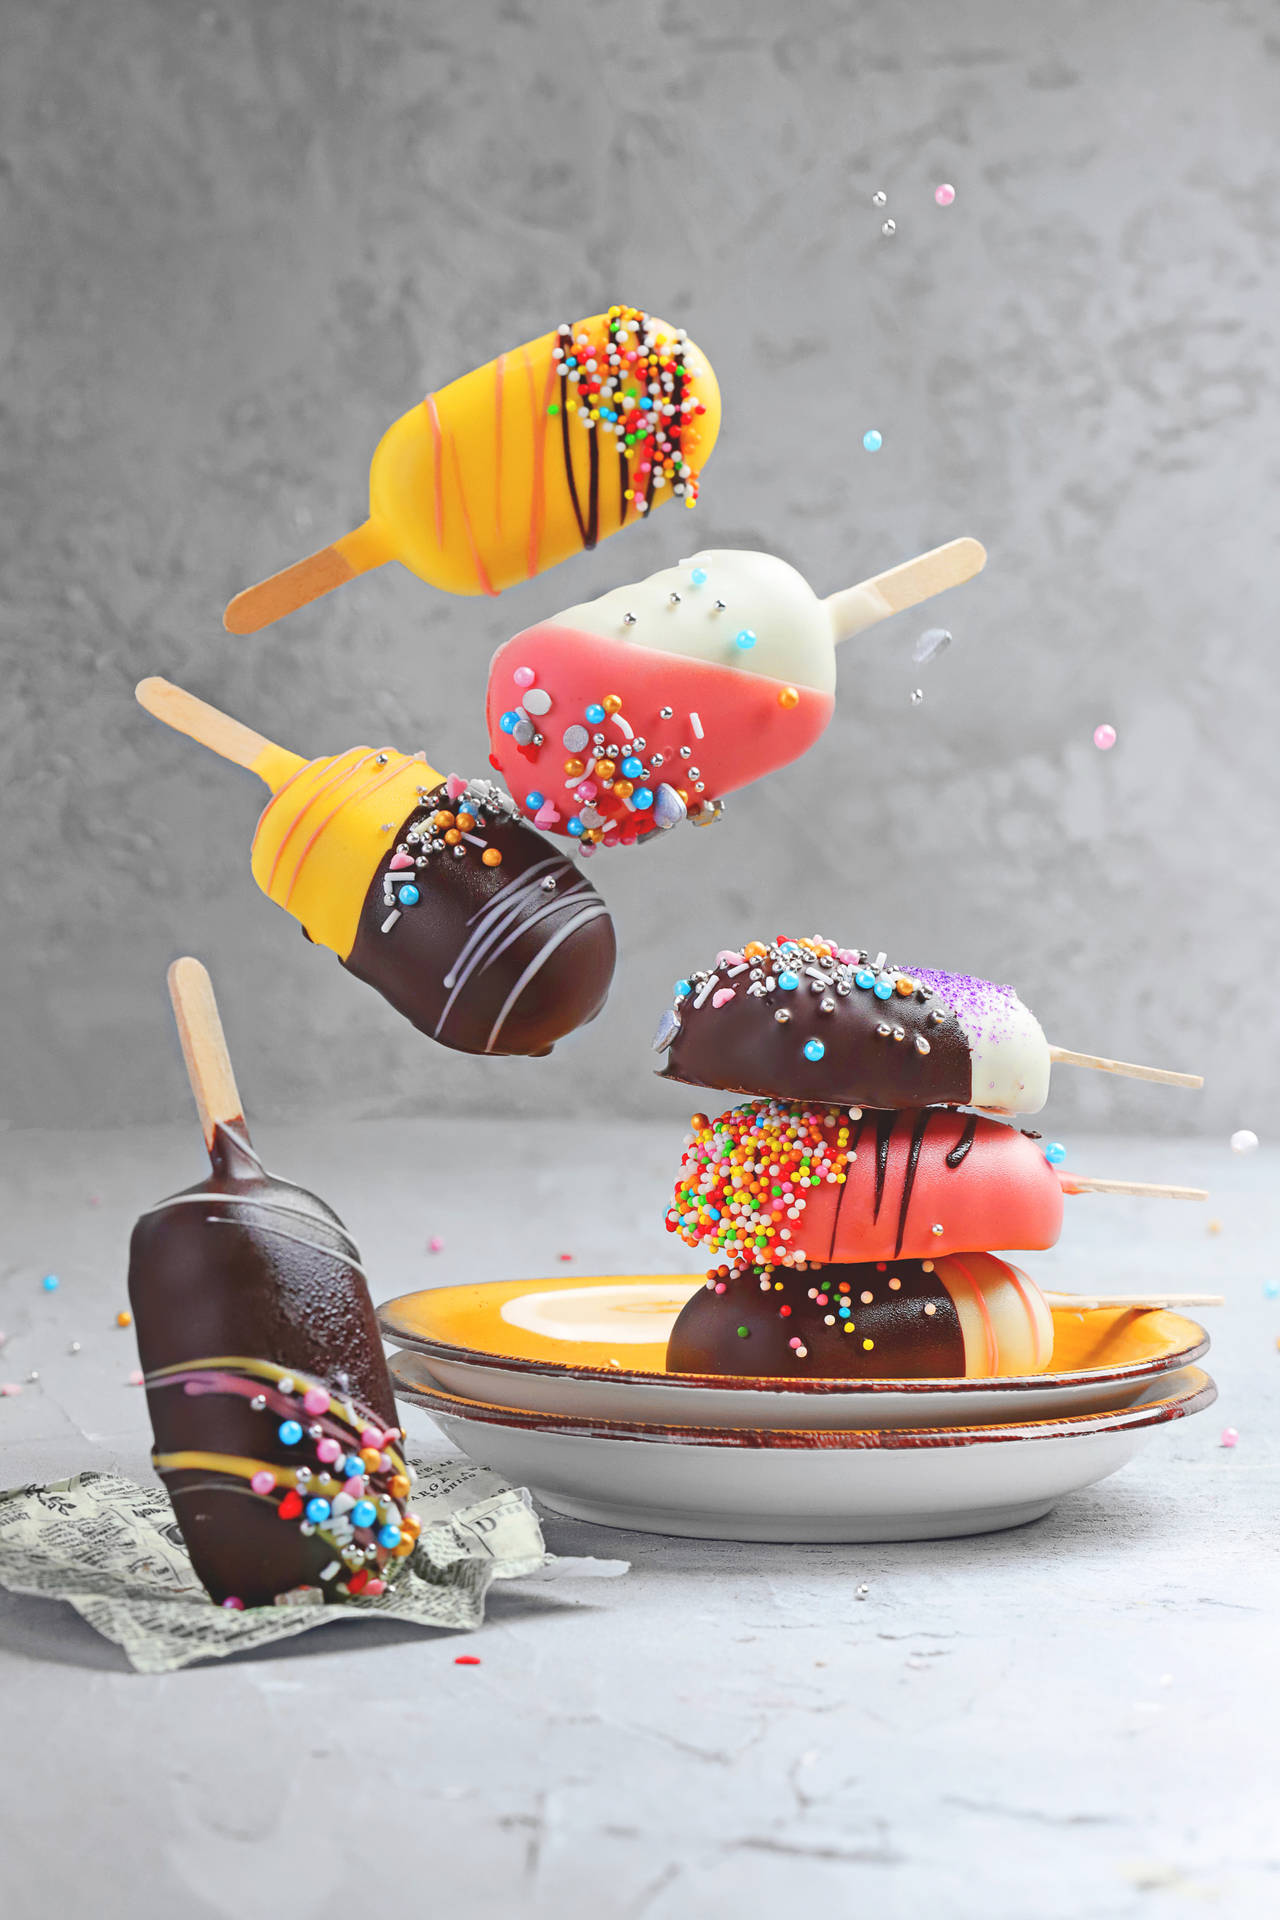 Ice Cream 4160X6240 Wallpaper and Background Image